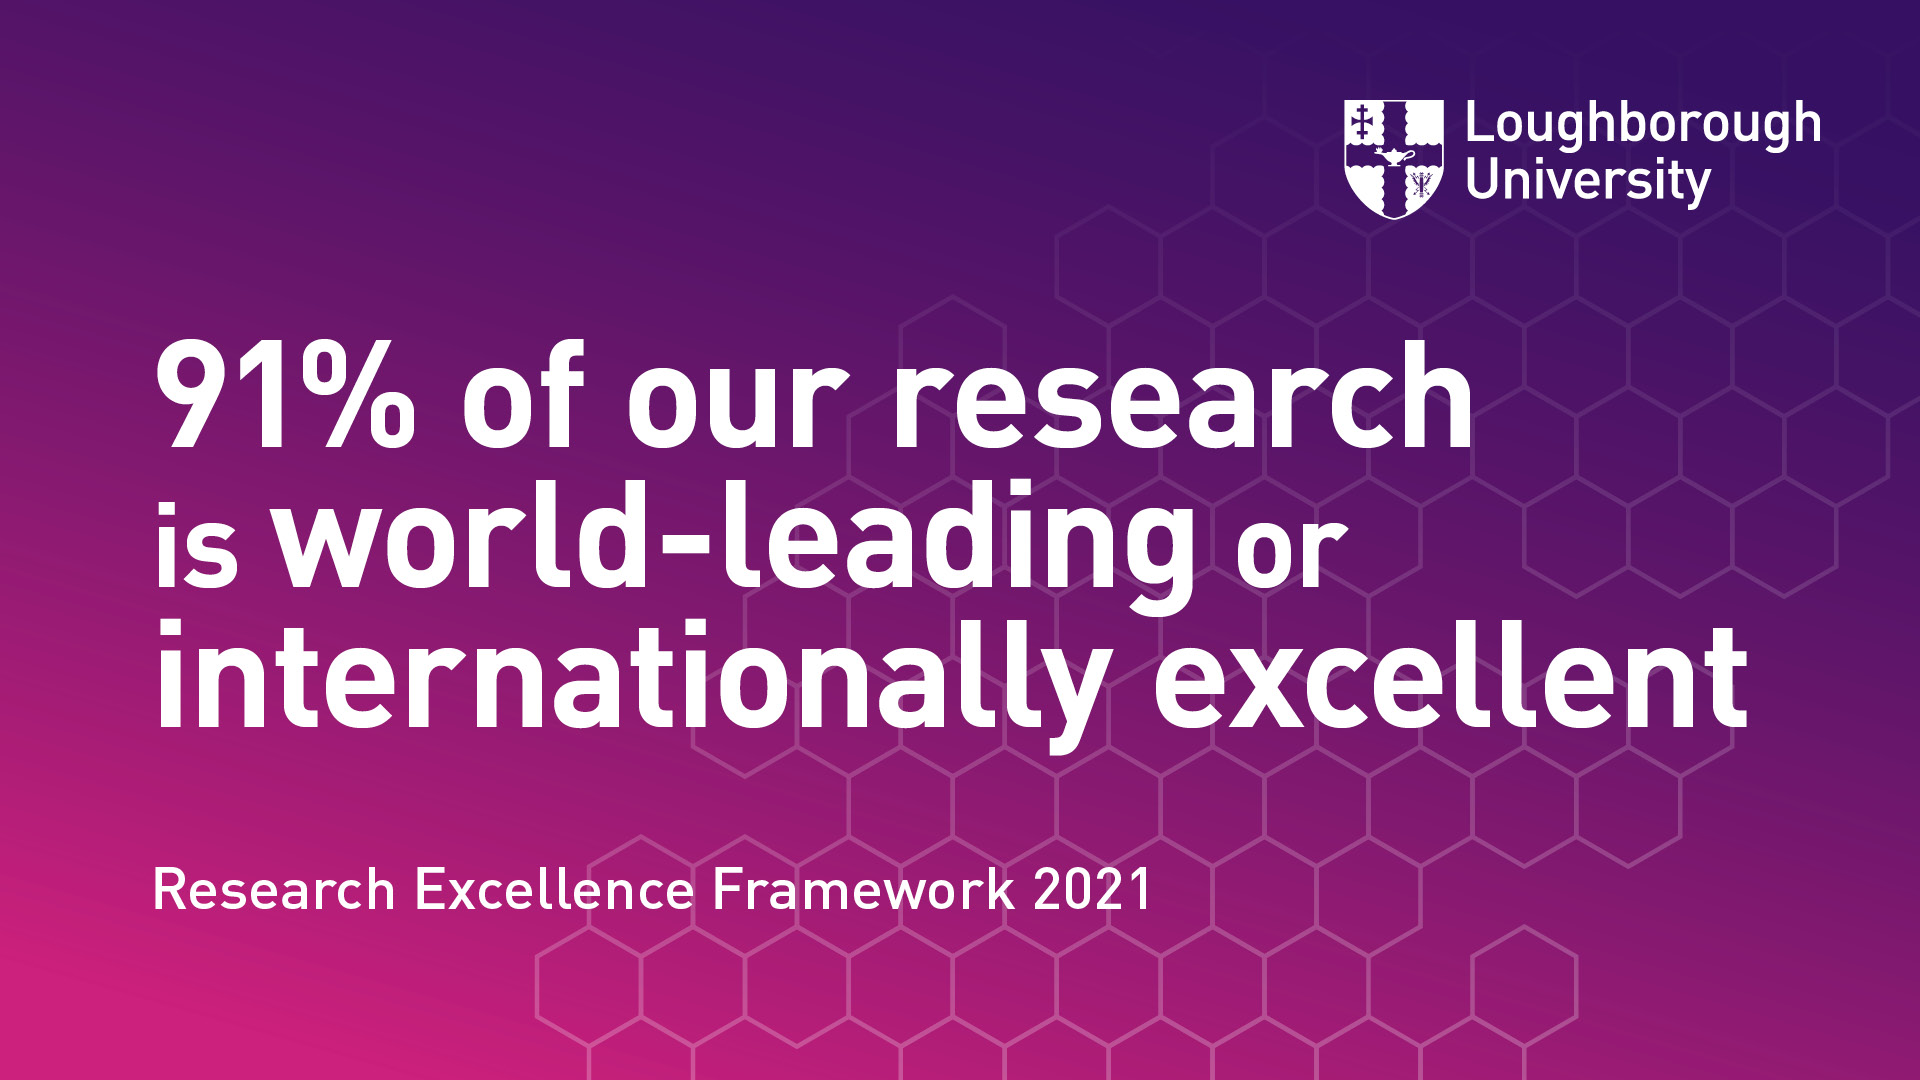 91% of our research is world-leading or internationally excellent. Research Excellence Framework 2021.